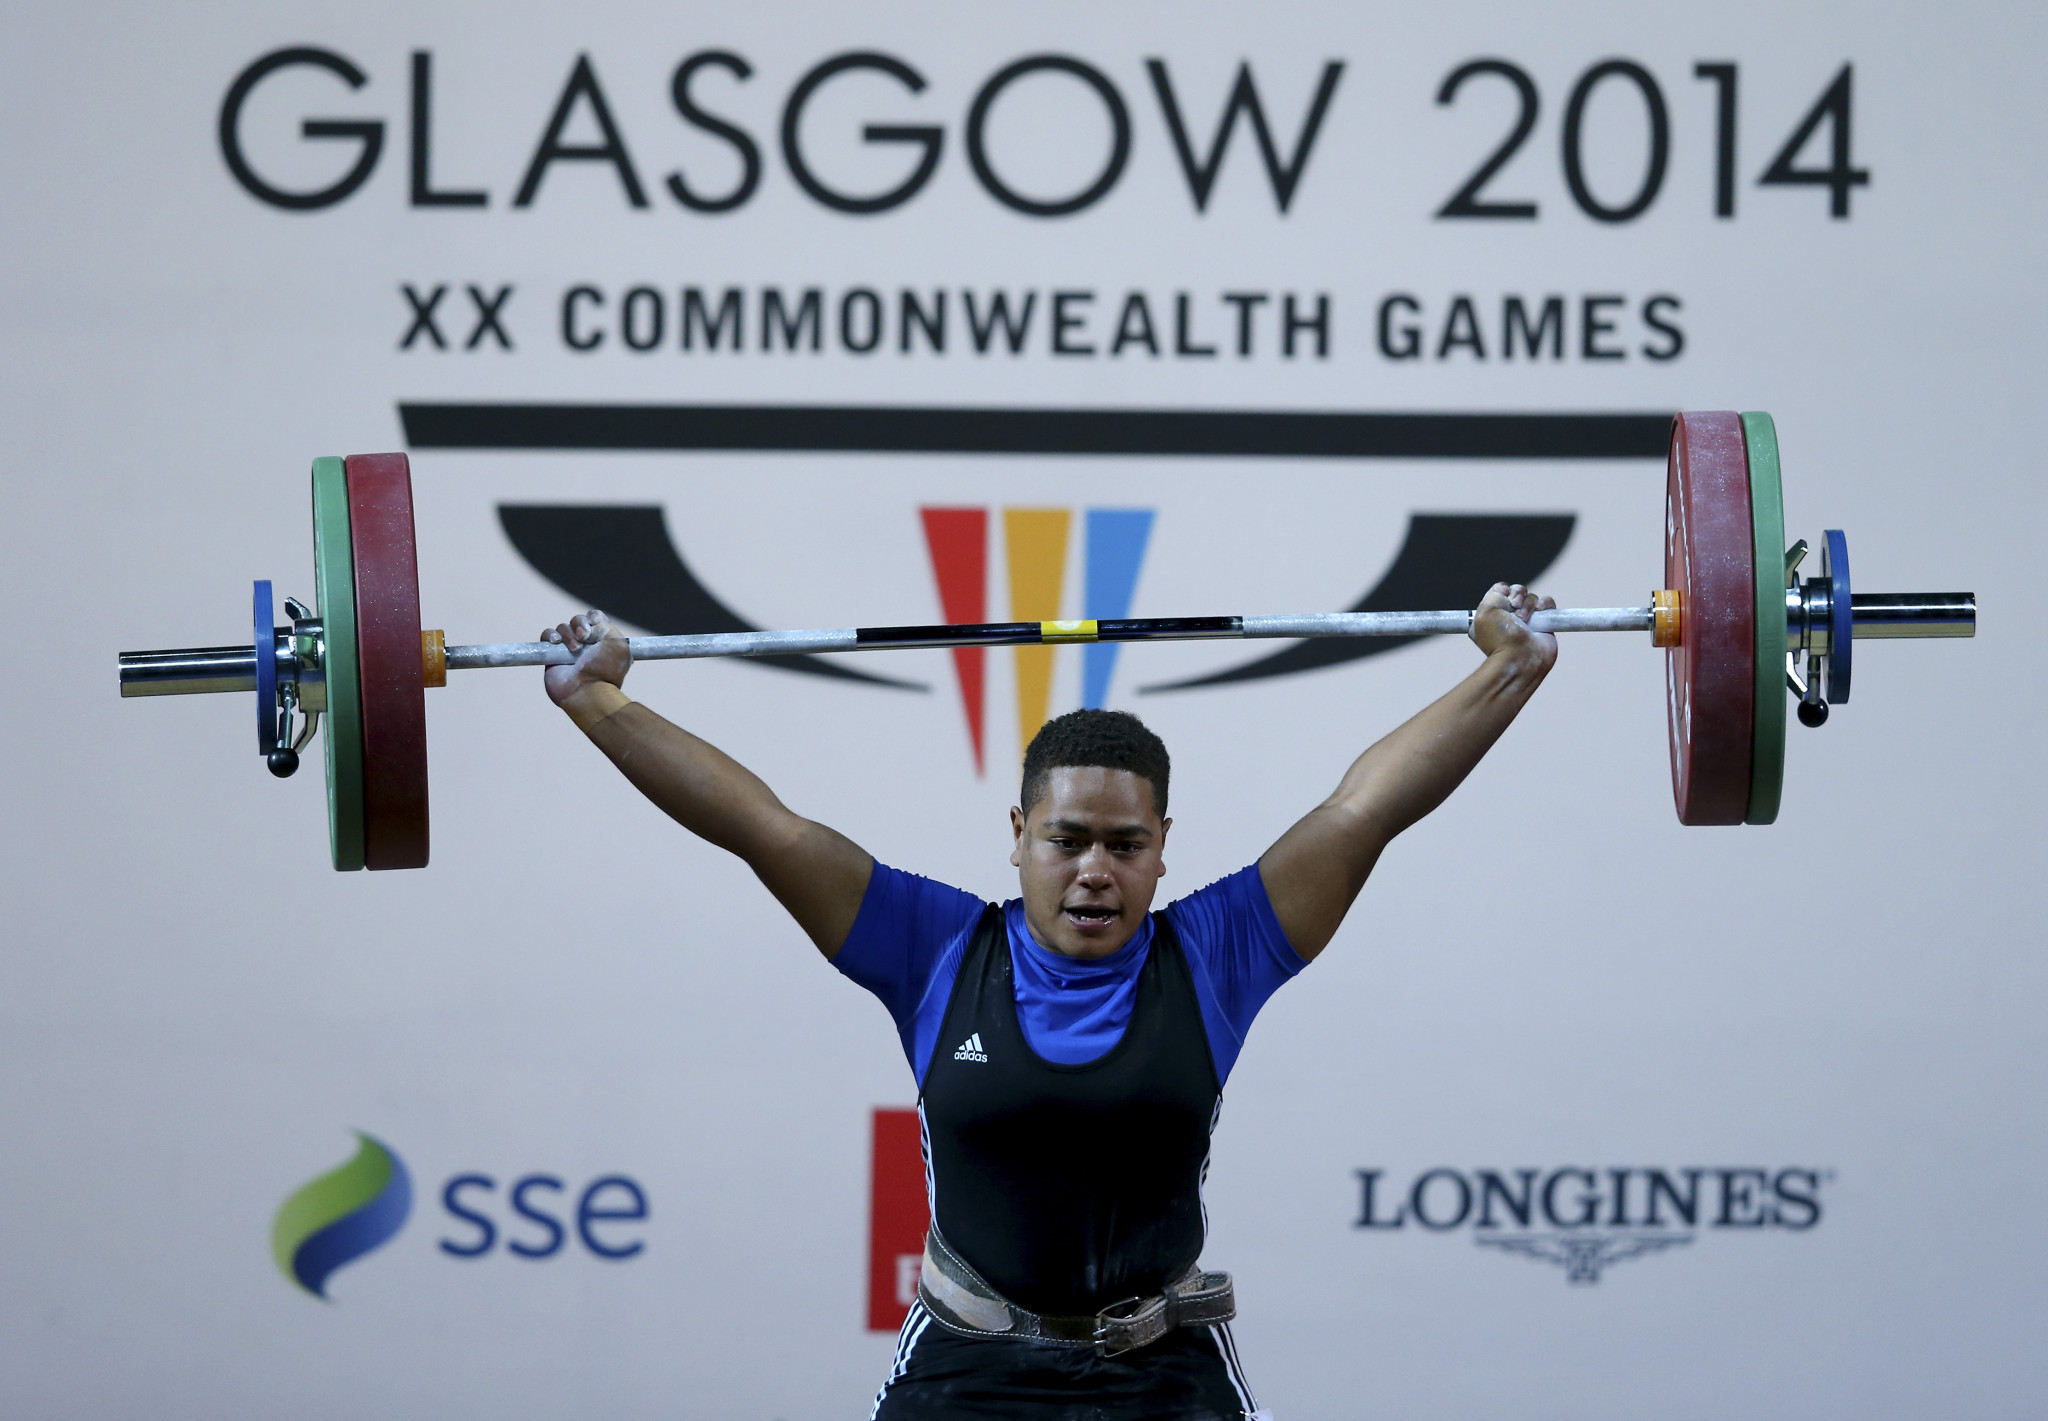 Apolonia Vaivai secured Fiji’s only medal of the Glasgow 2014 Commonwealth Games ©Getty Images